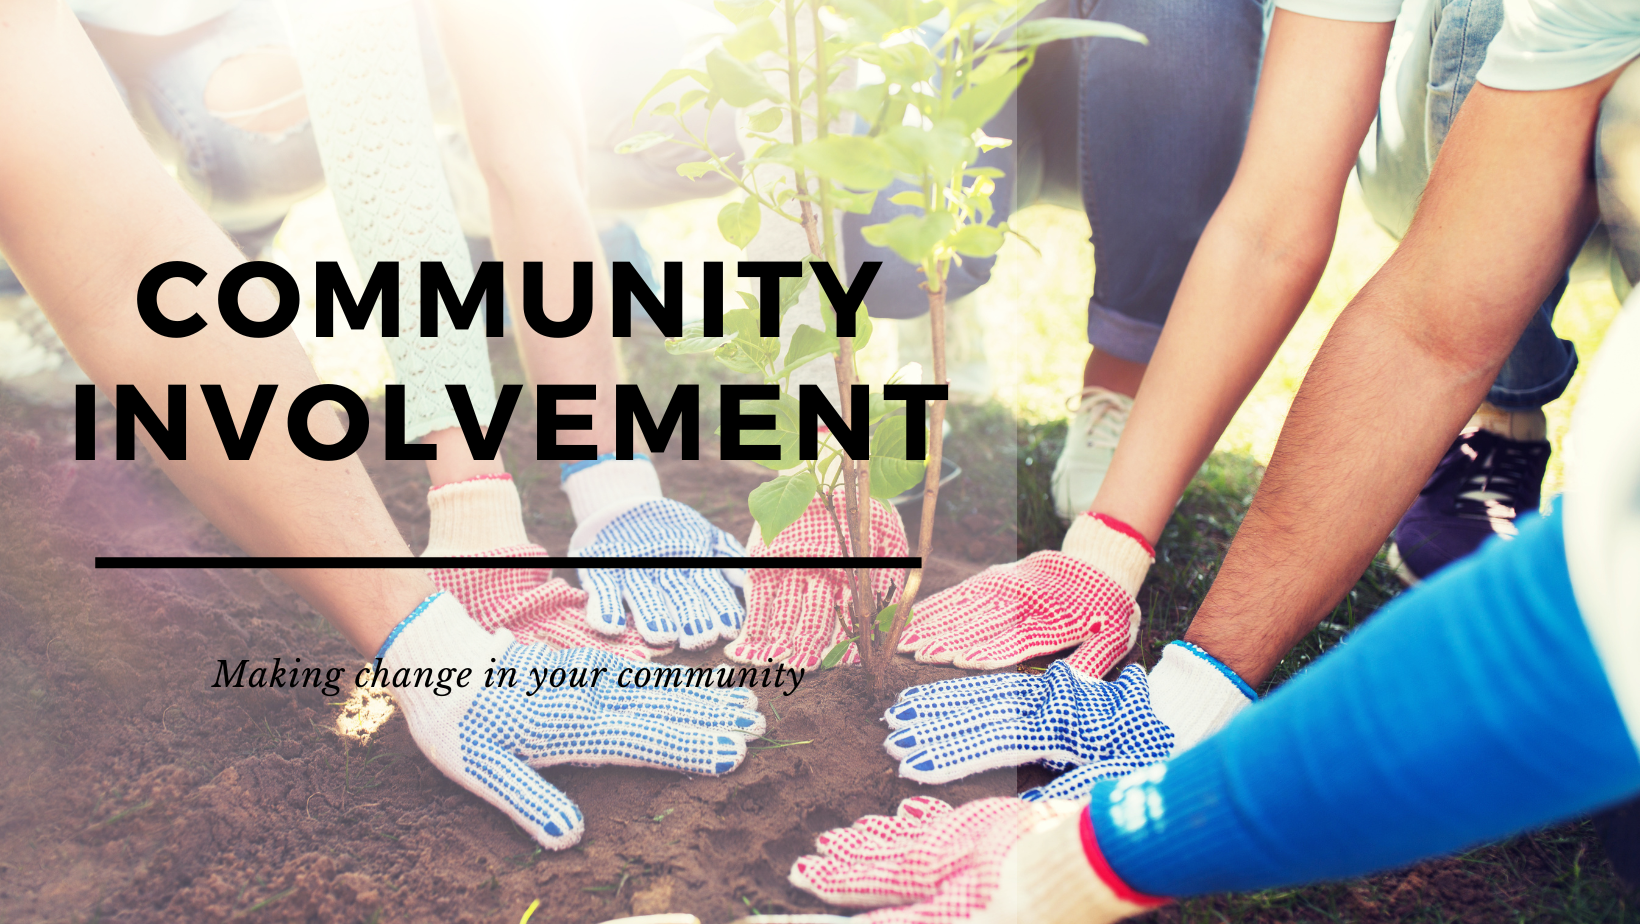 Making Change in your Community